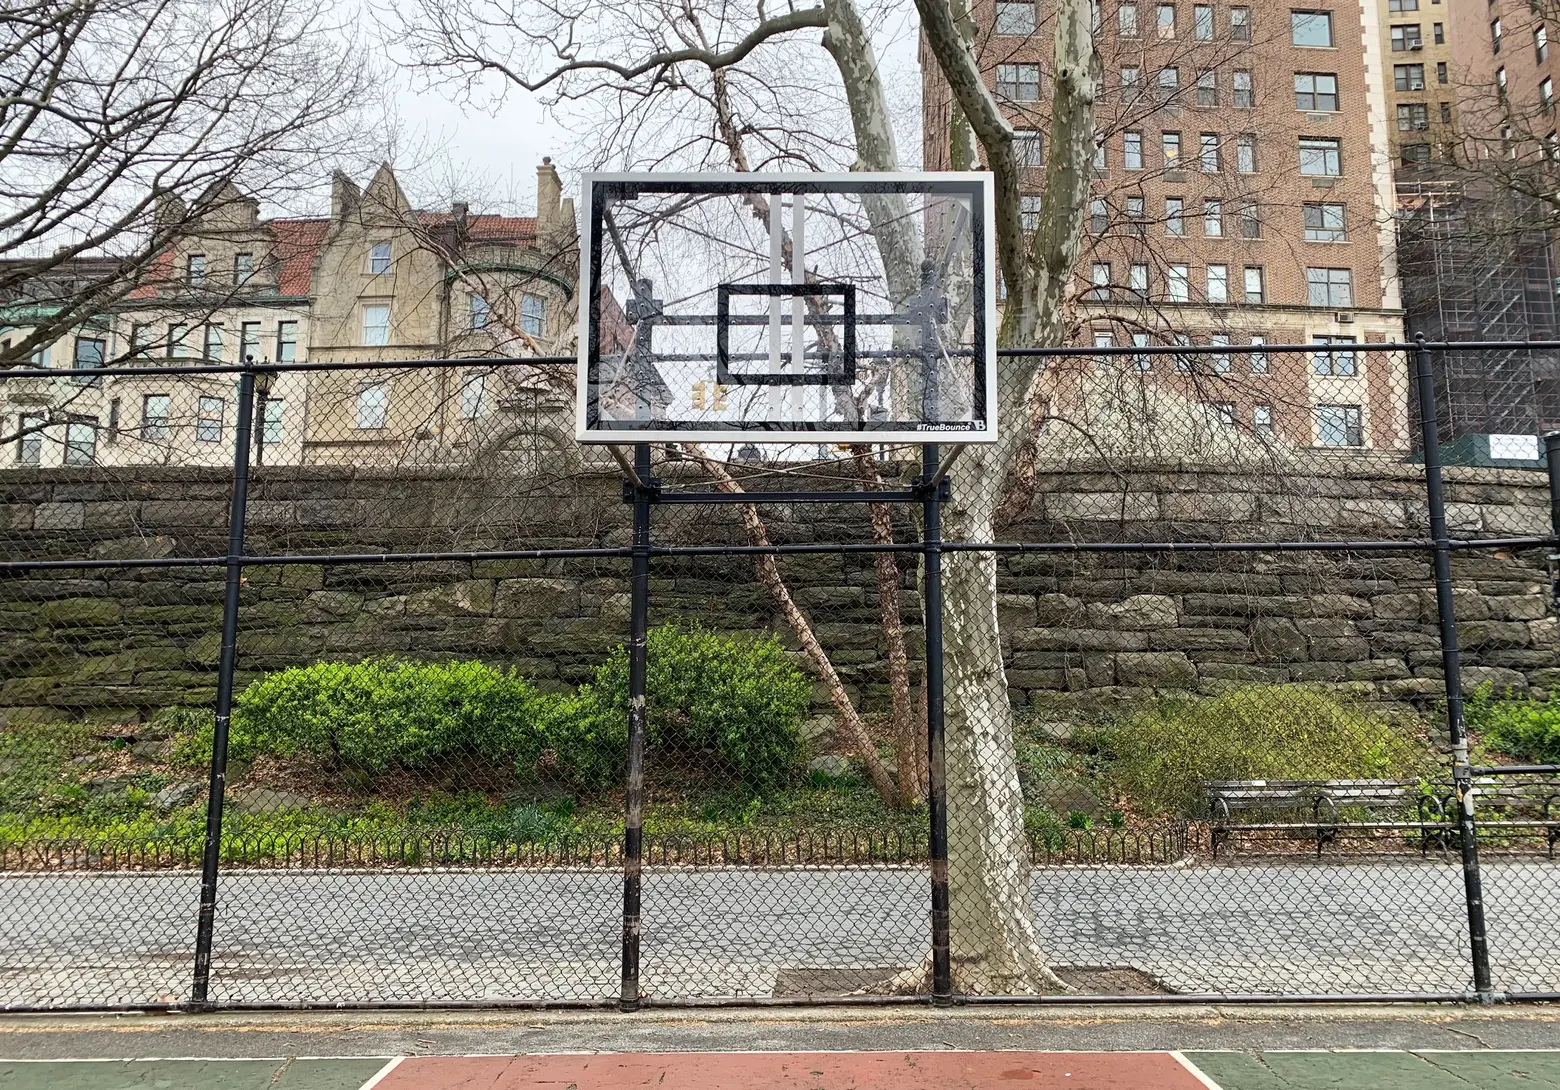 NYC removed 80 basketball hoops from parks